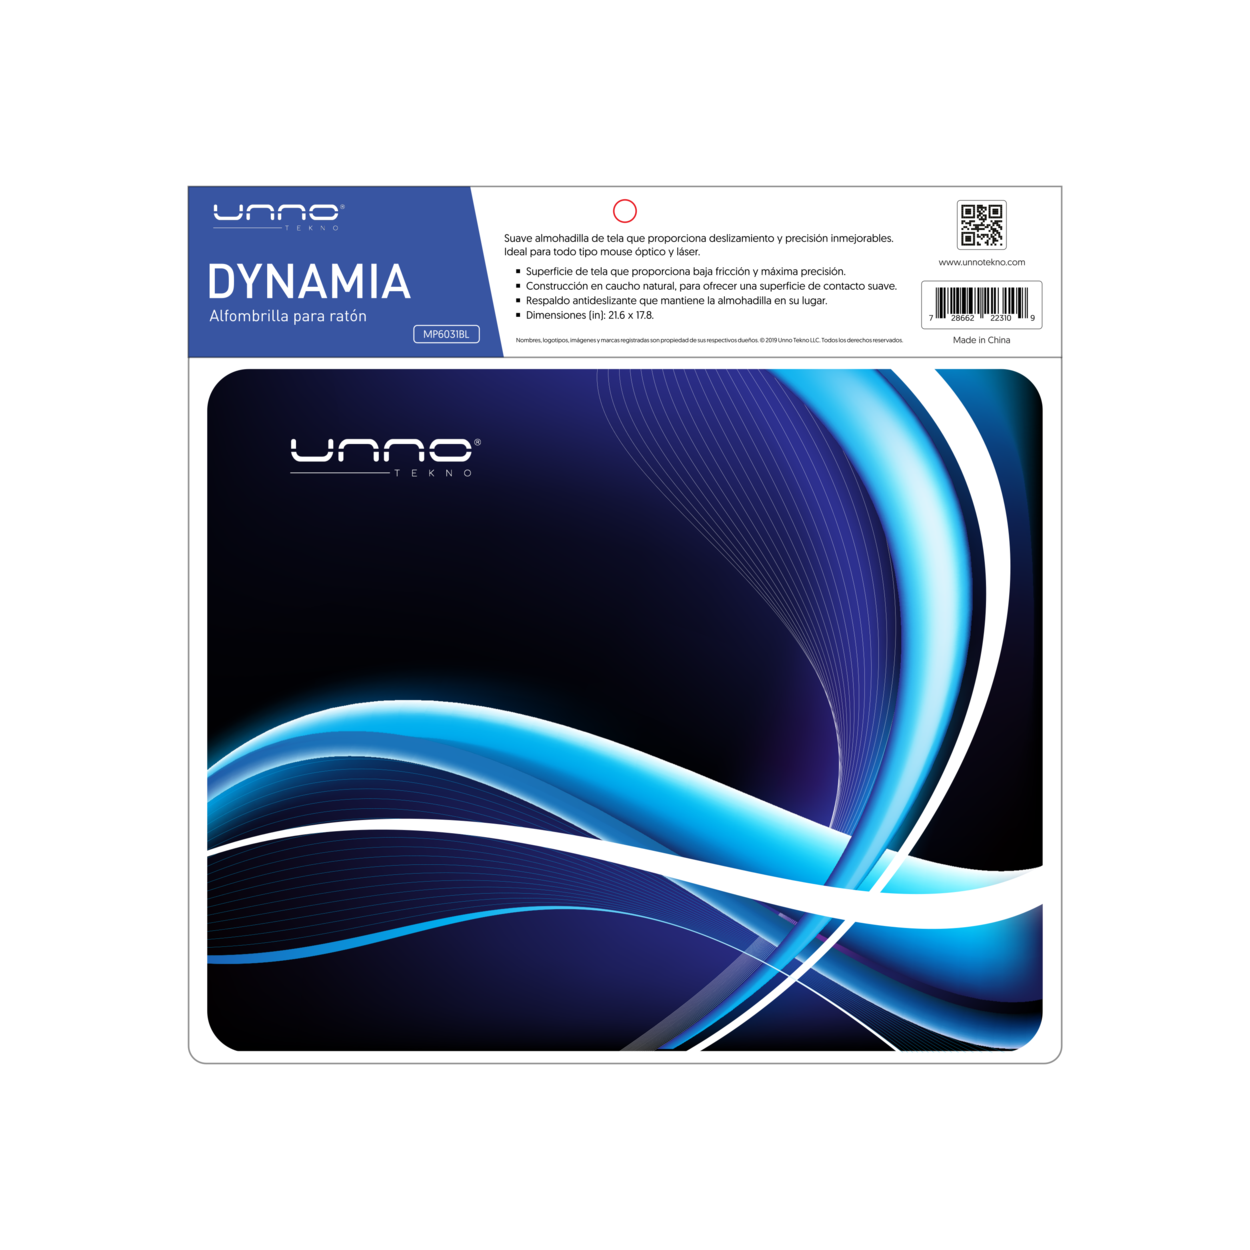 DYNAMIA MOUSE PAD MP6031 For Sale in Trinidad